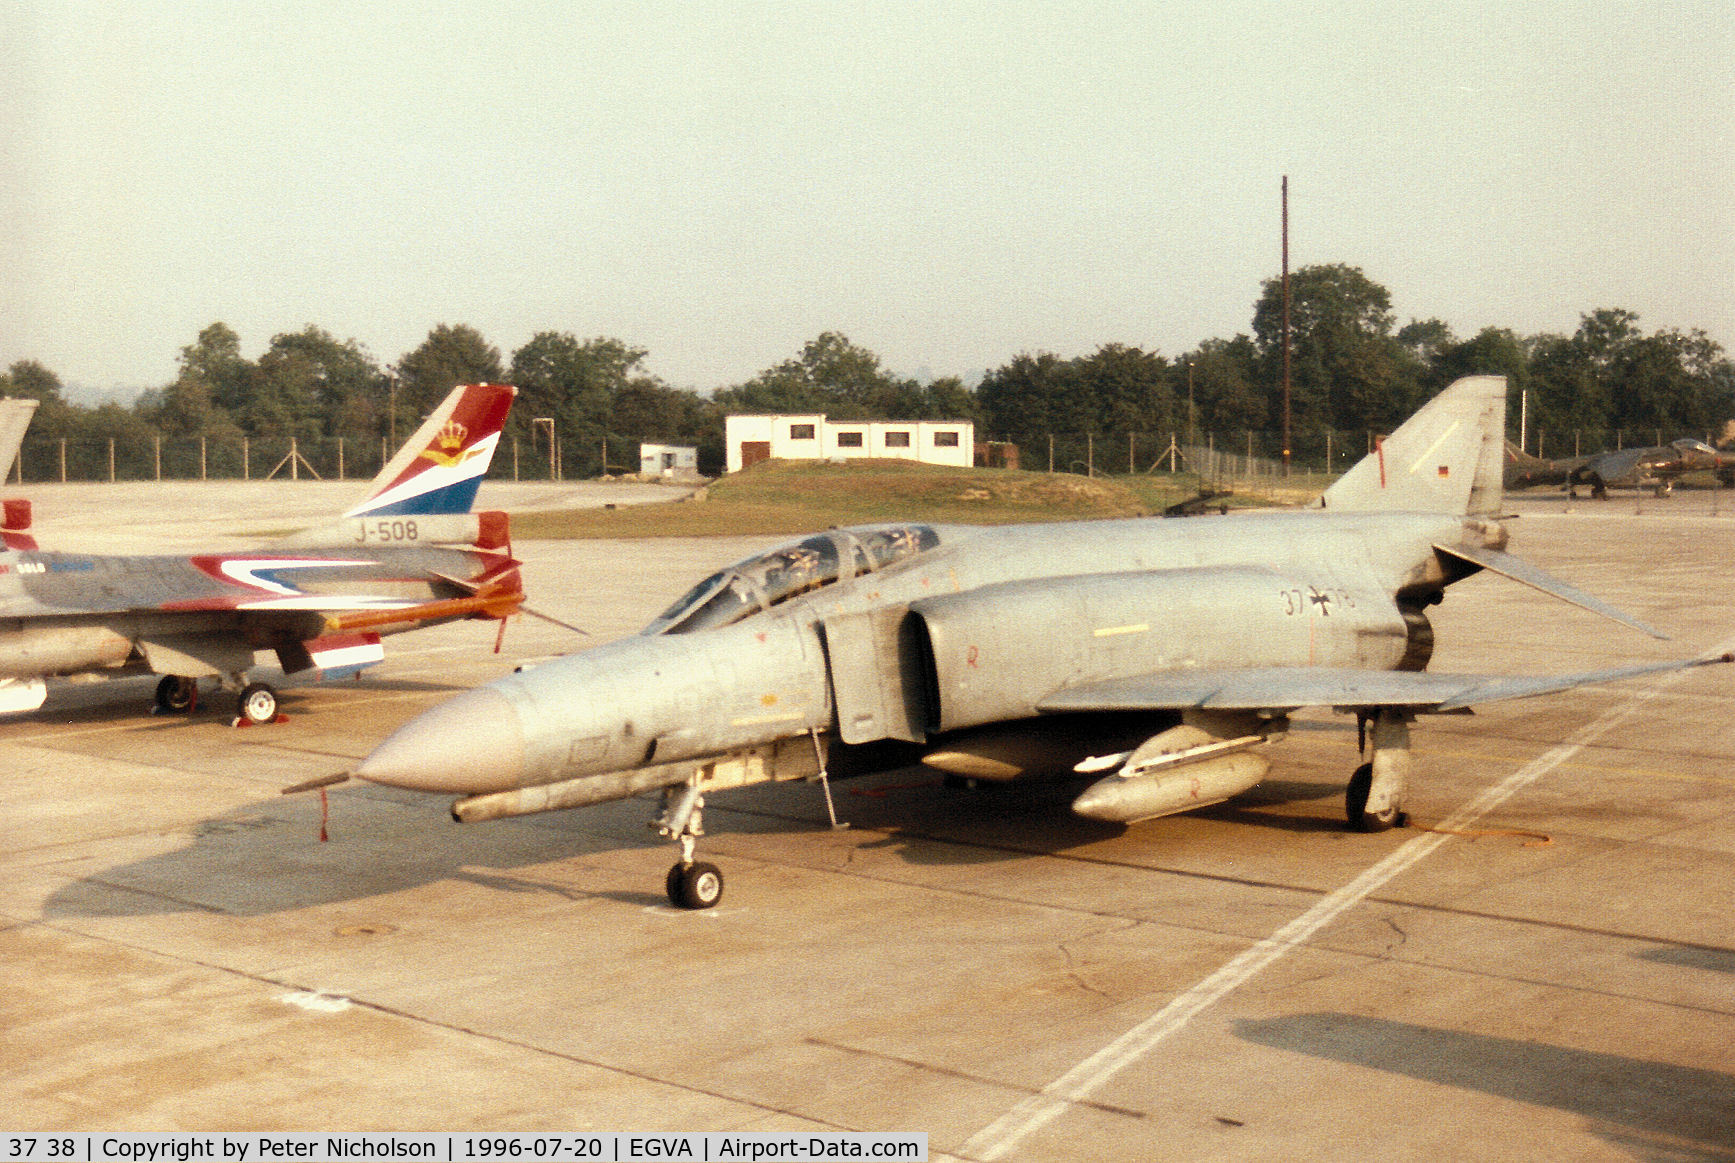 37 38, 1972 McDonnell Douglas F-4F Phantom II C/N 4441, F-4F Phantom of JG-71 of the German Air Force based at Wittmund on the flight-line at the 1996 Royal Intnl Air Tattoo at RAF Fairford.